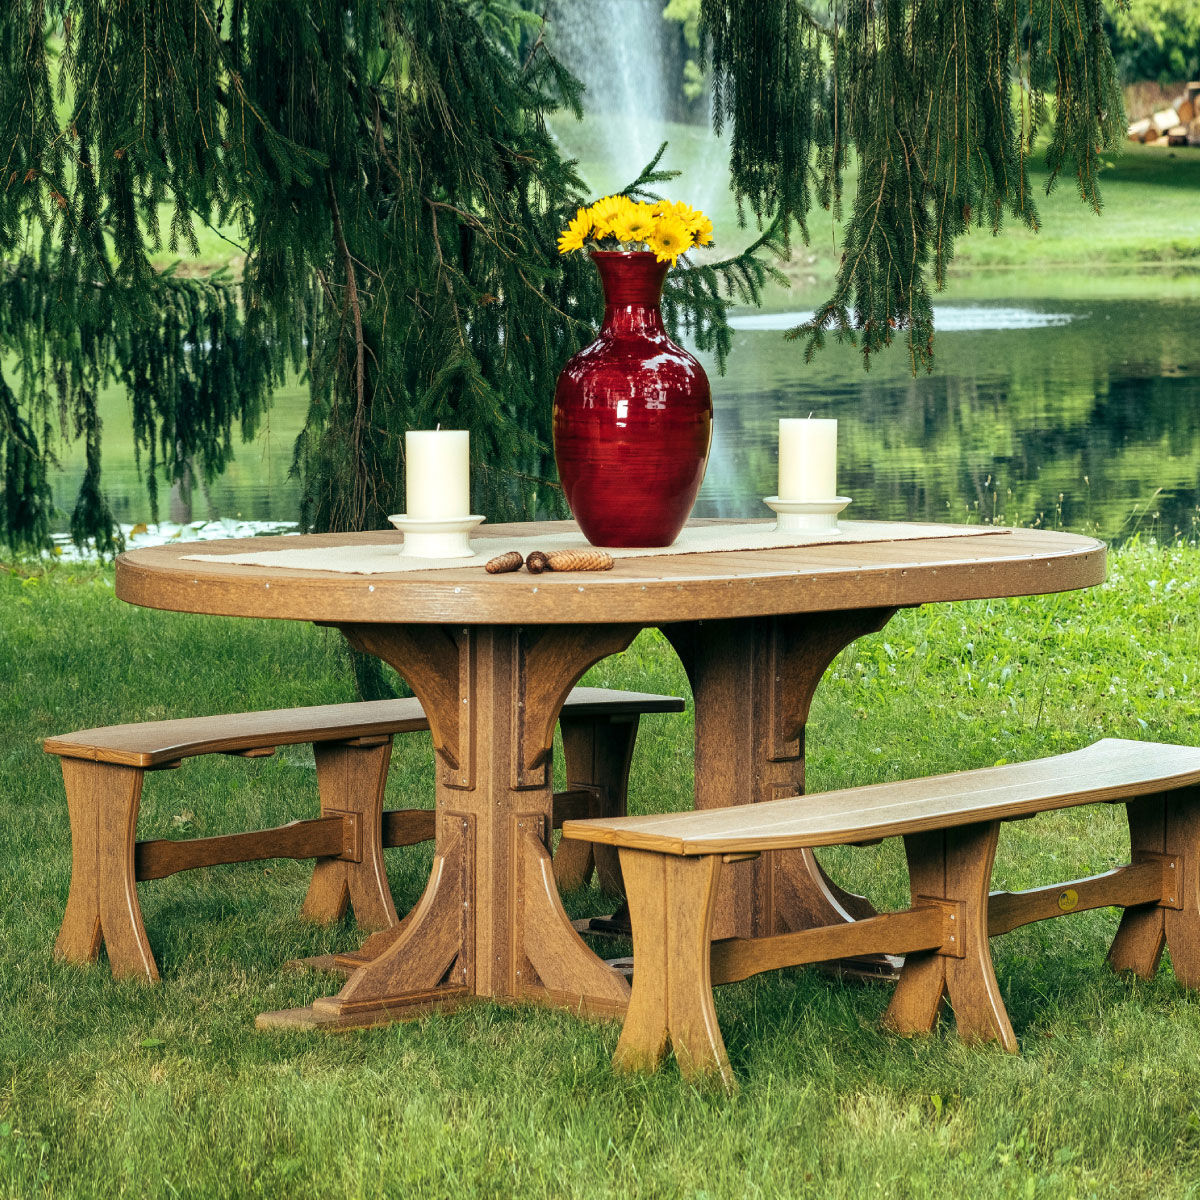 Comfort Craft Oval Dining Height Table & BenchesComfort Craft Oval Dining Height Poly-lumber Table & Benches